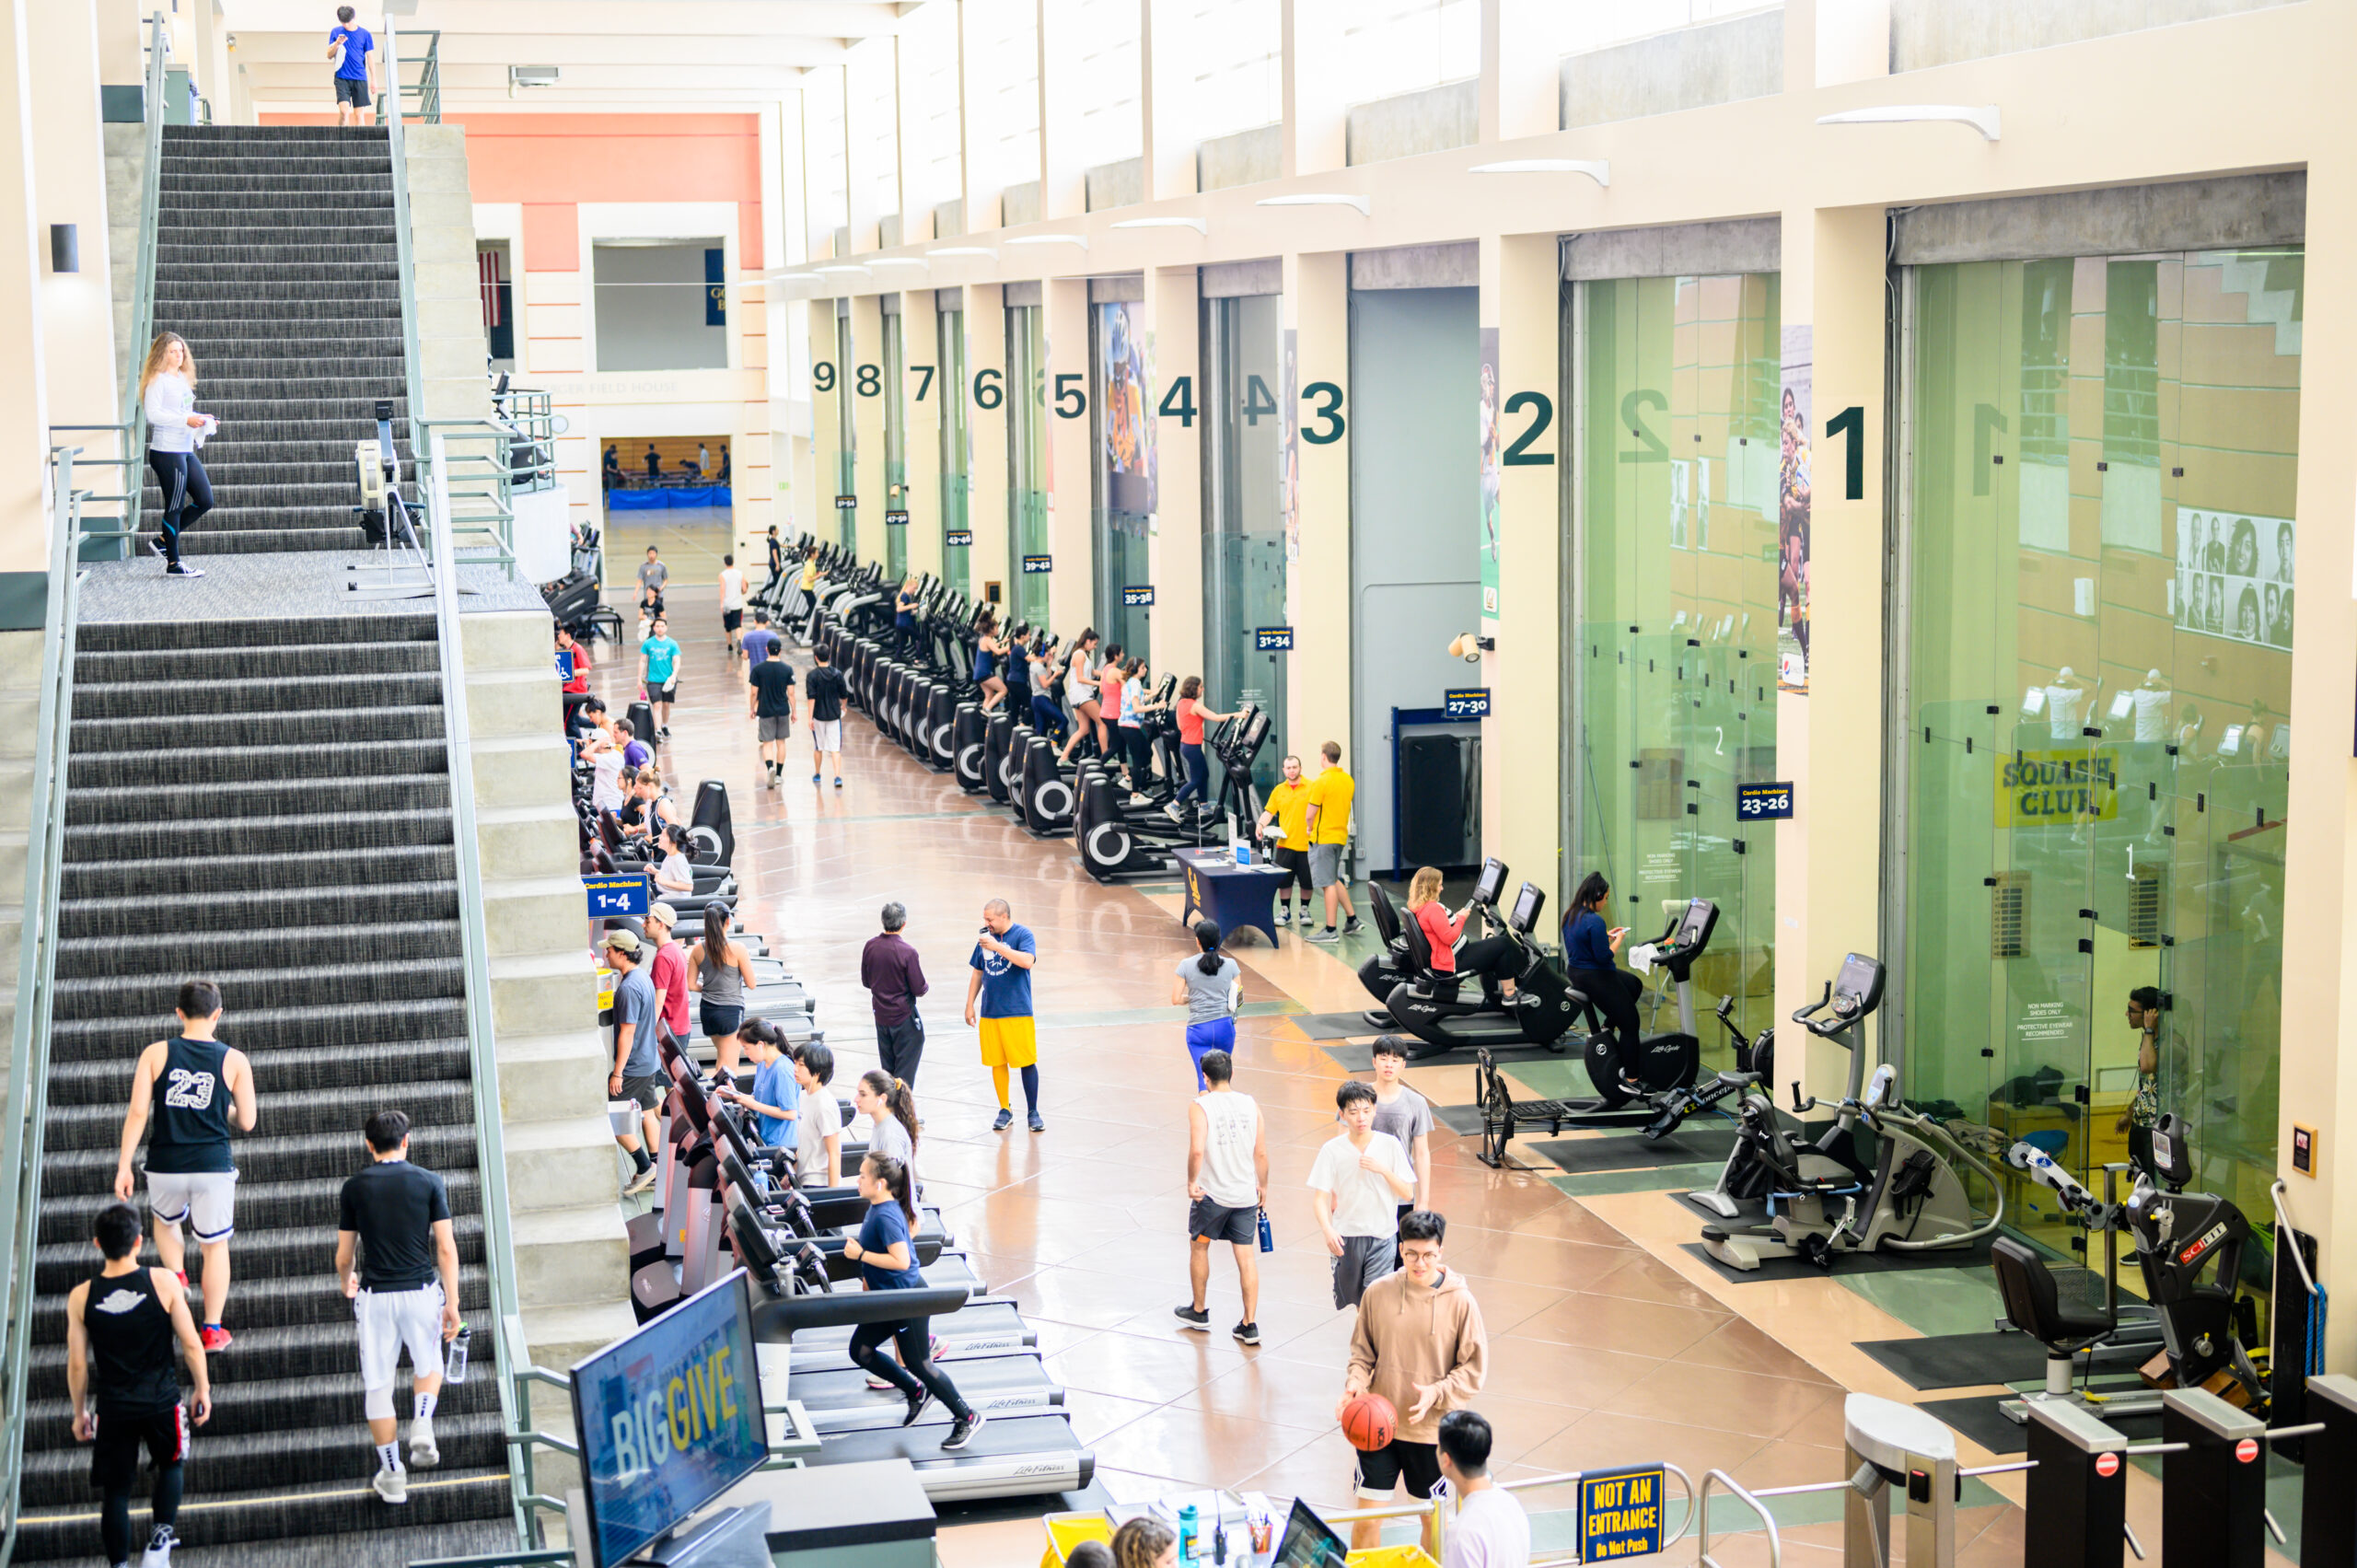 High-to-low view of the RSF with treadmills, stationary bikes, and stairs to the second floor.